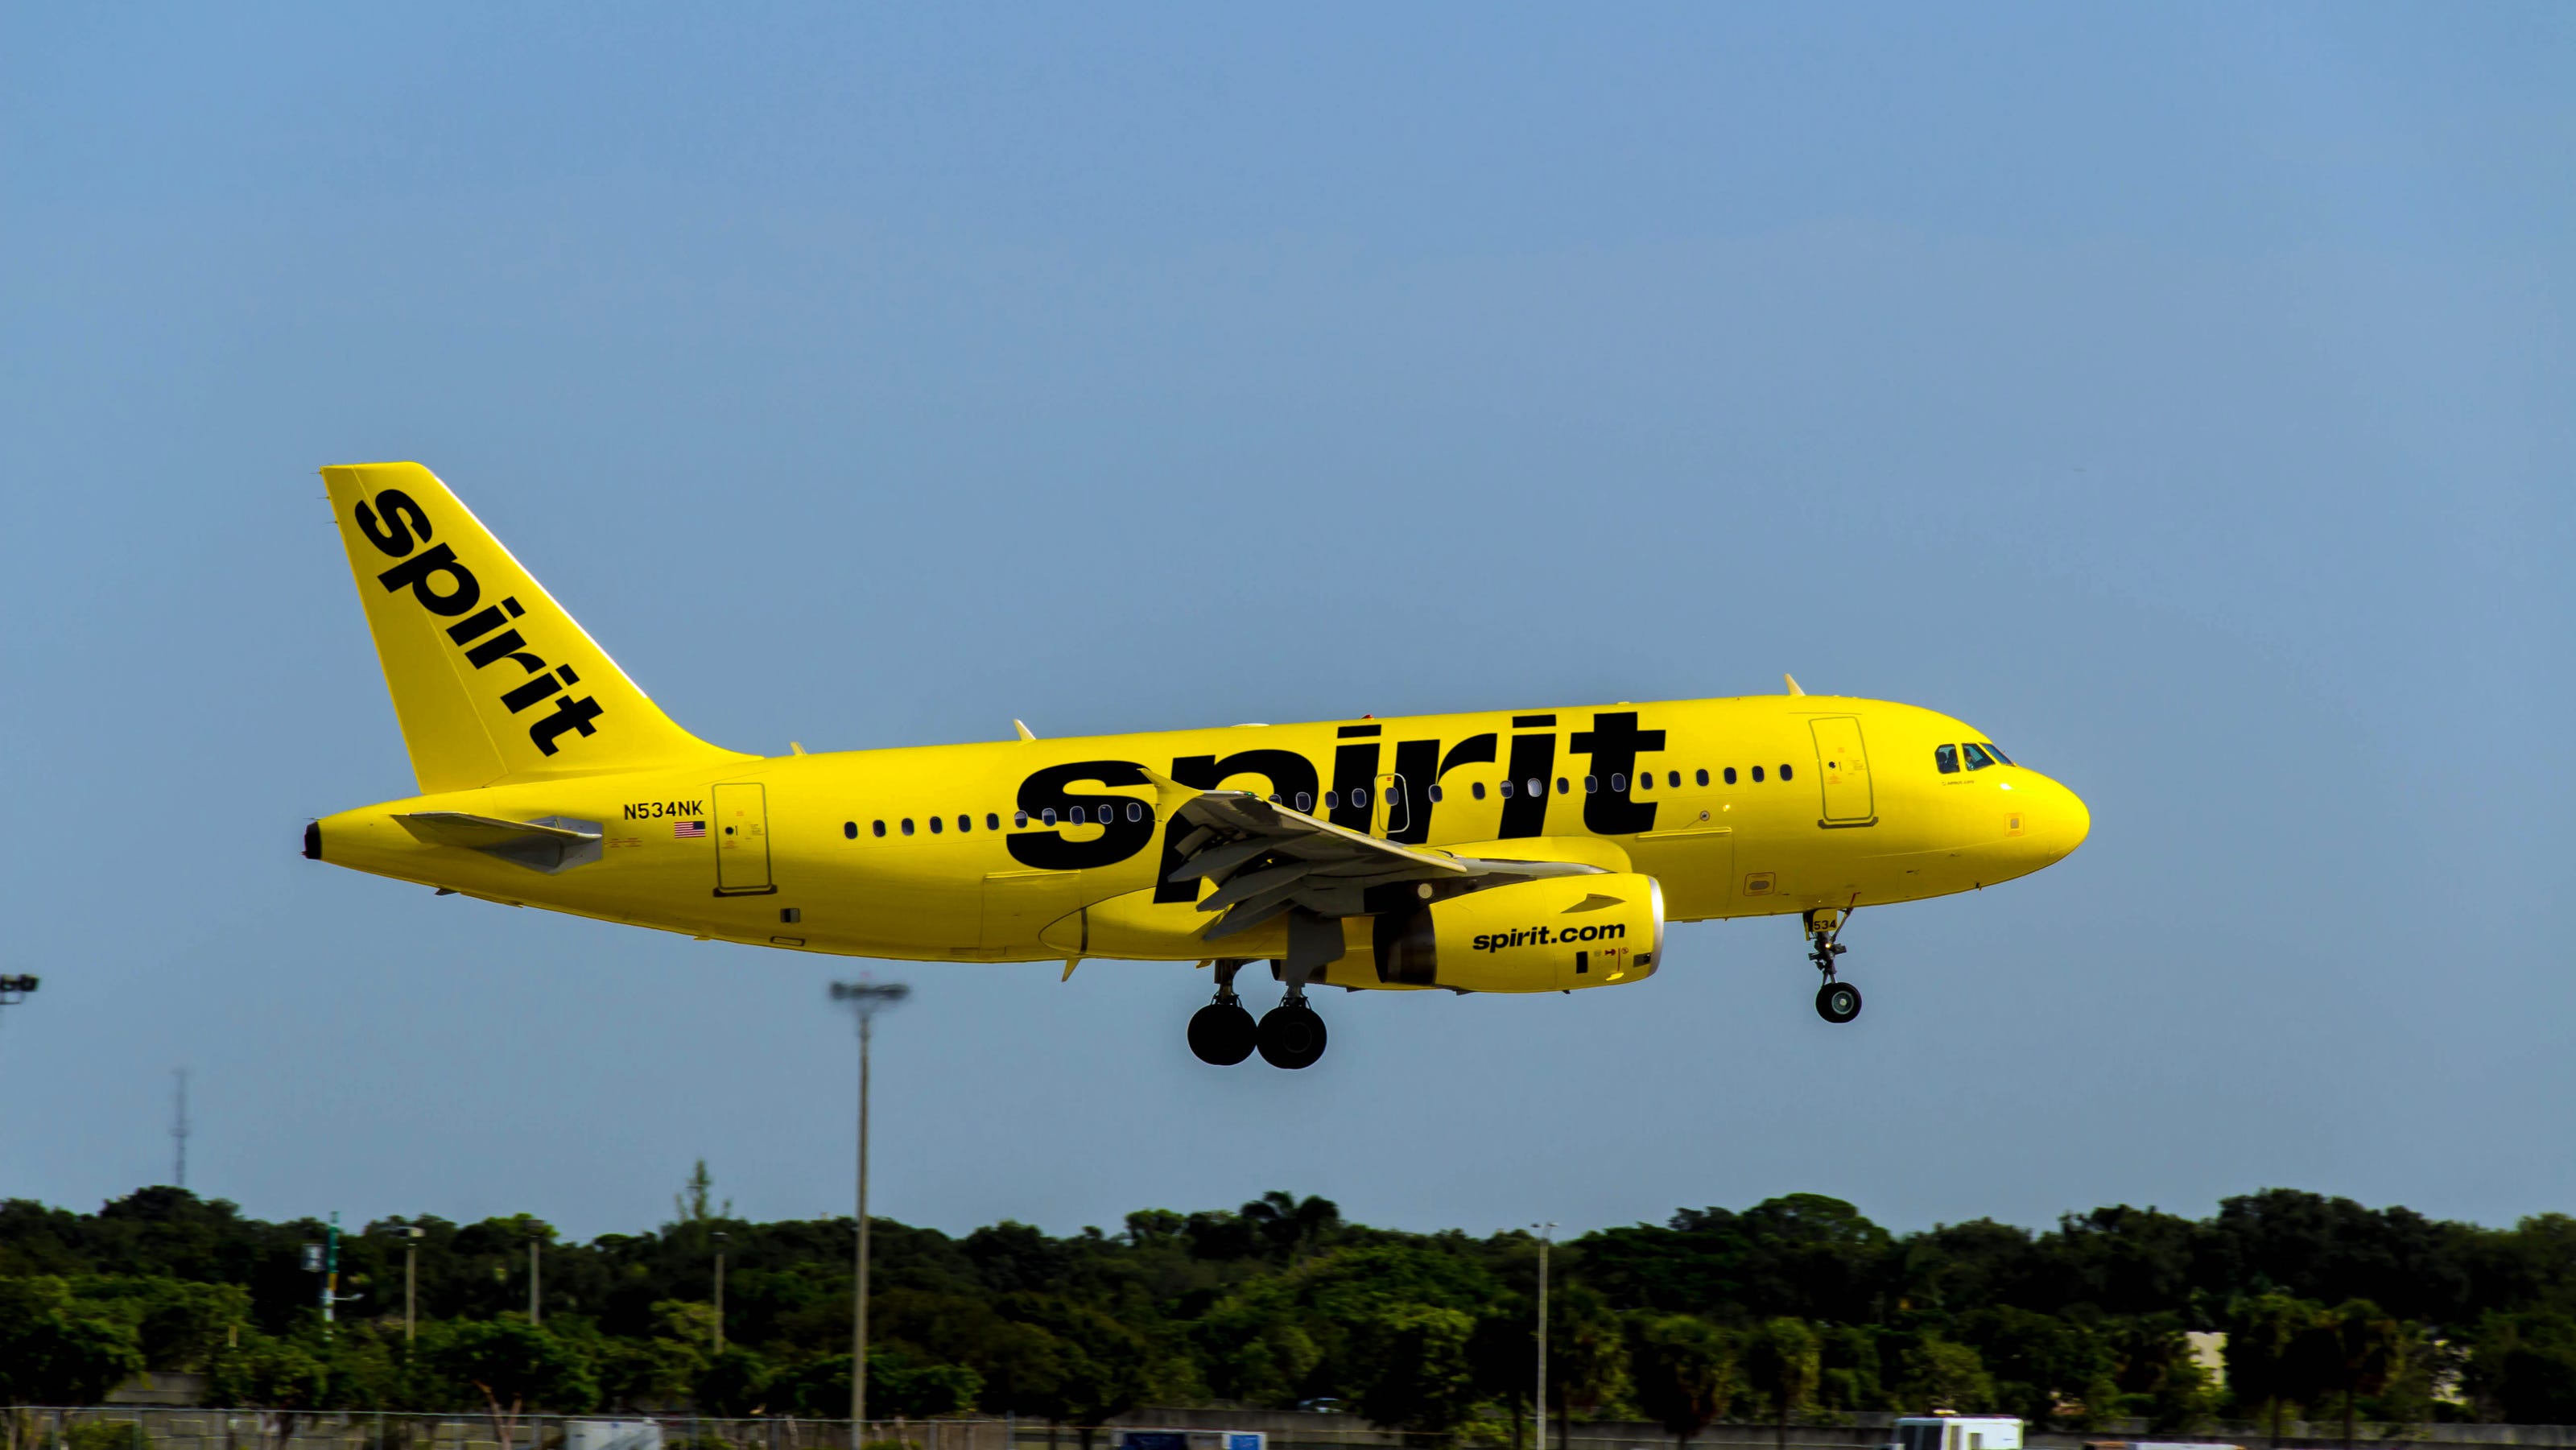 spirit-airlines-is-shedding-its-bad-reputation